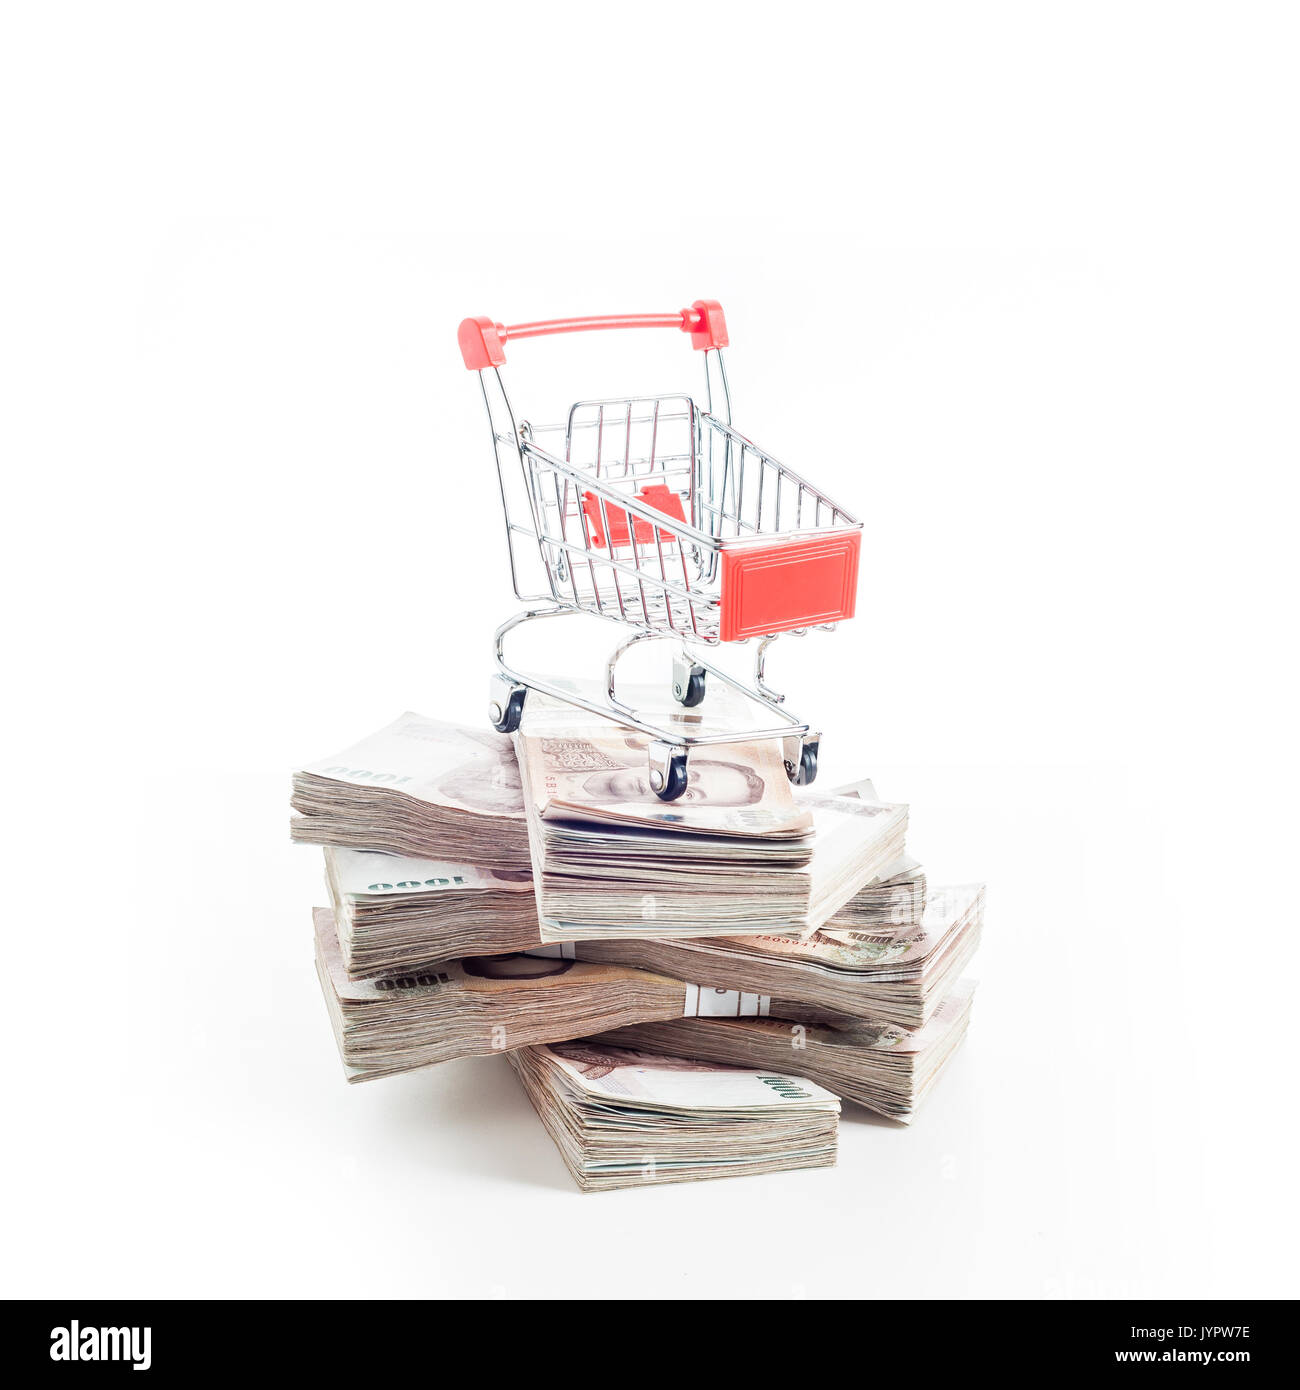 shopping cart on Thai baht (THB) banknotes. Thailand currency. Stock Photo